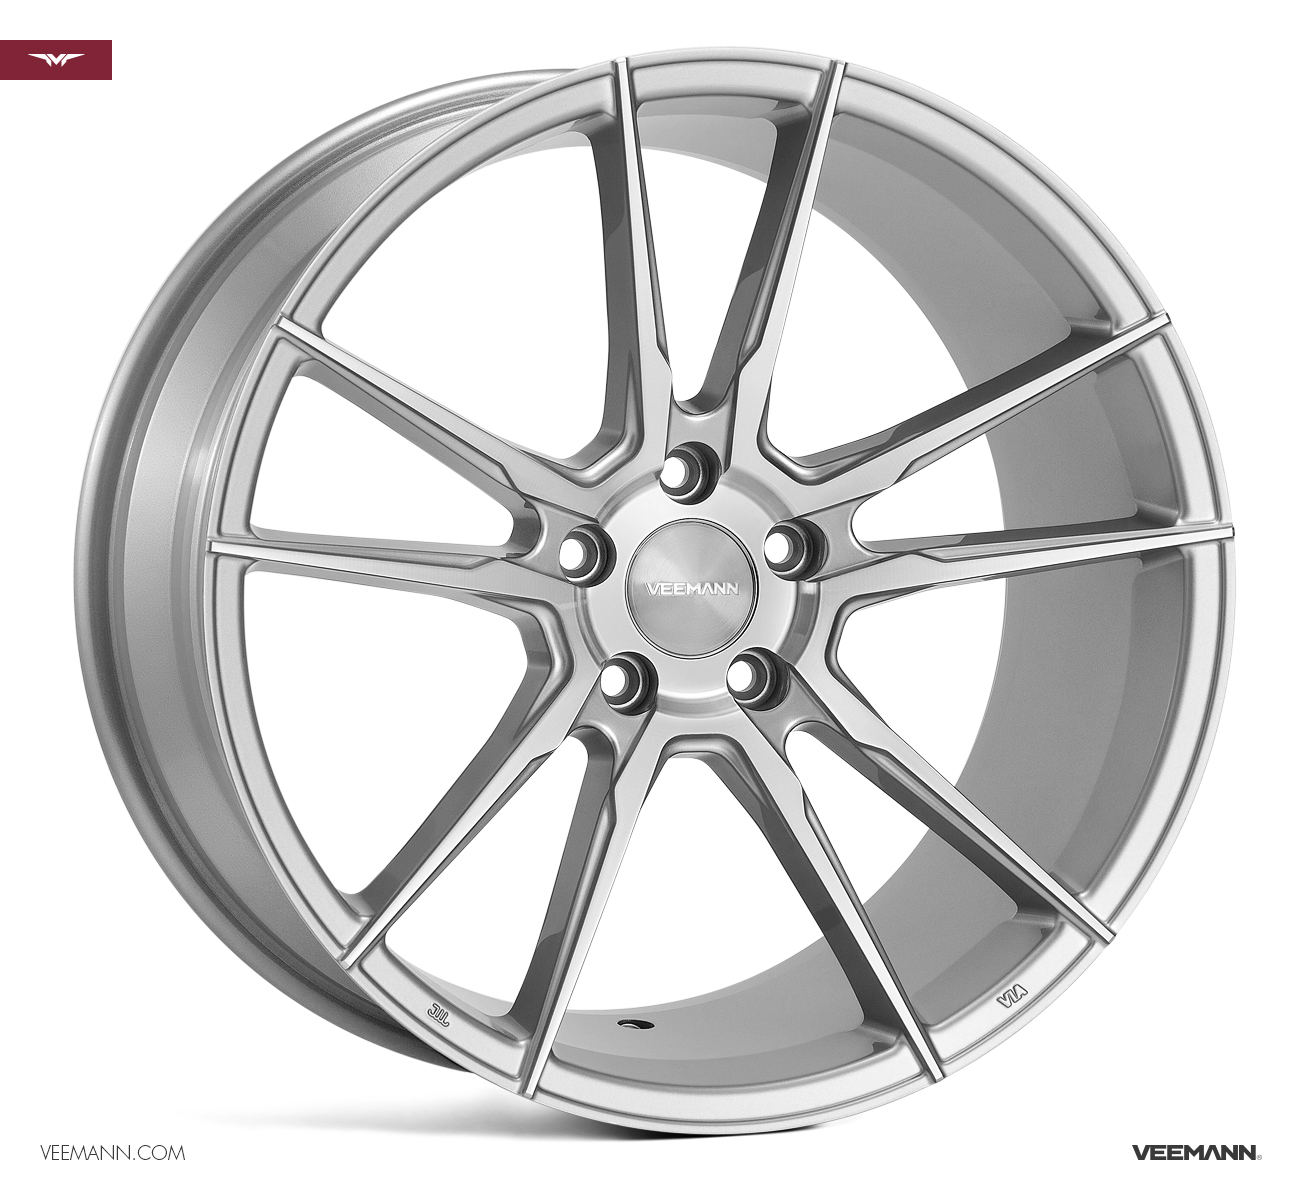 NEW 20" VEEMANN V-FS24 ALLOY WHEELS IN SILVER POL WITH WIDER 10" ALL ROUND